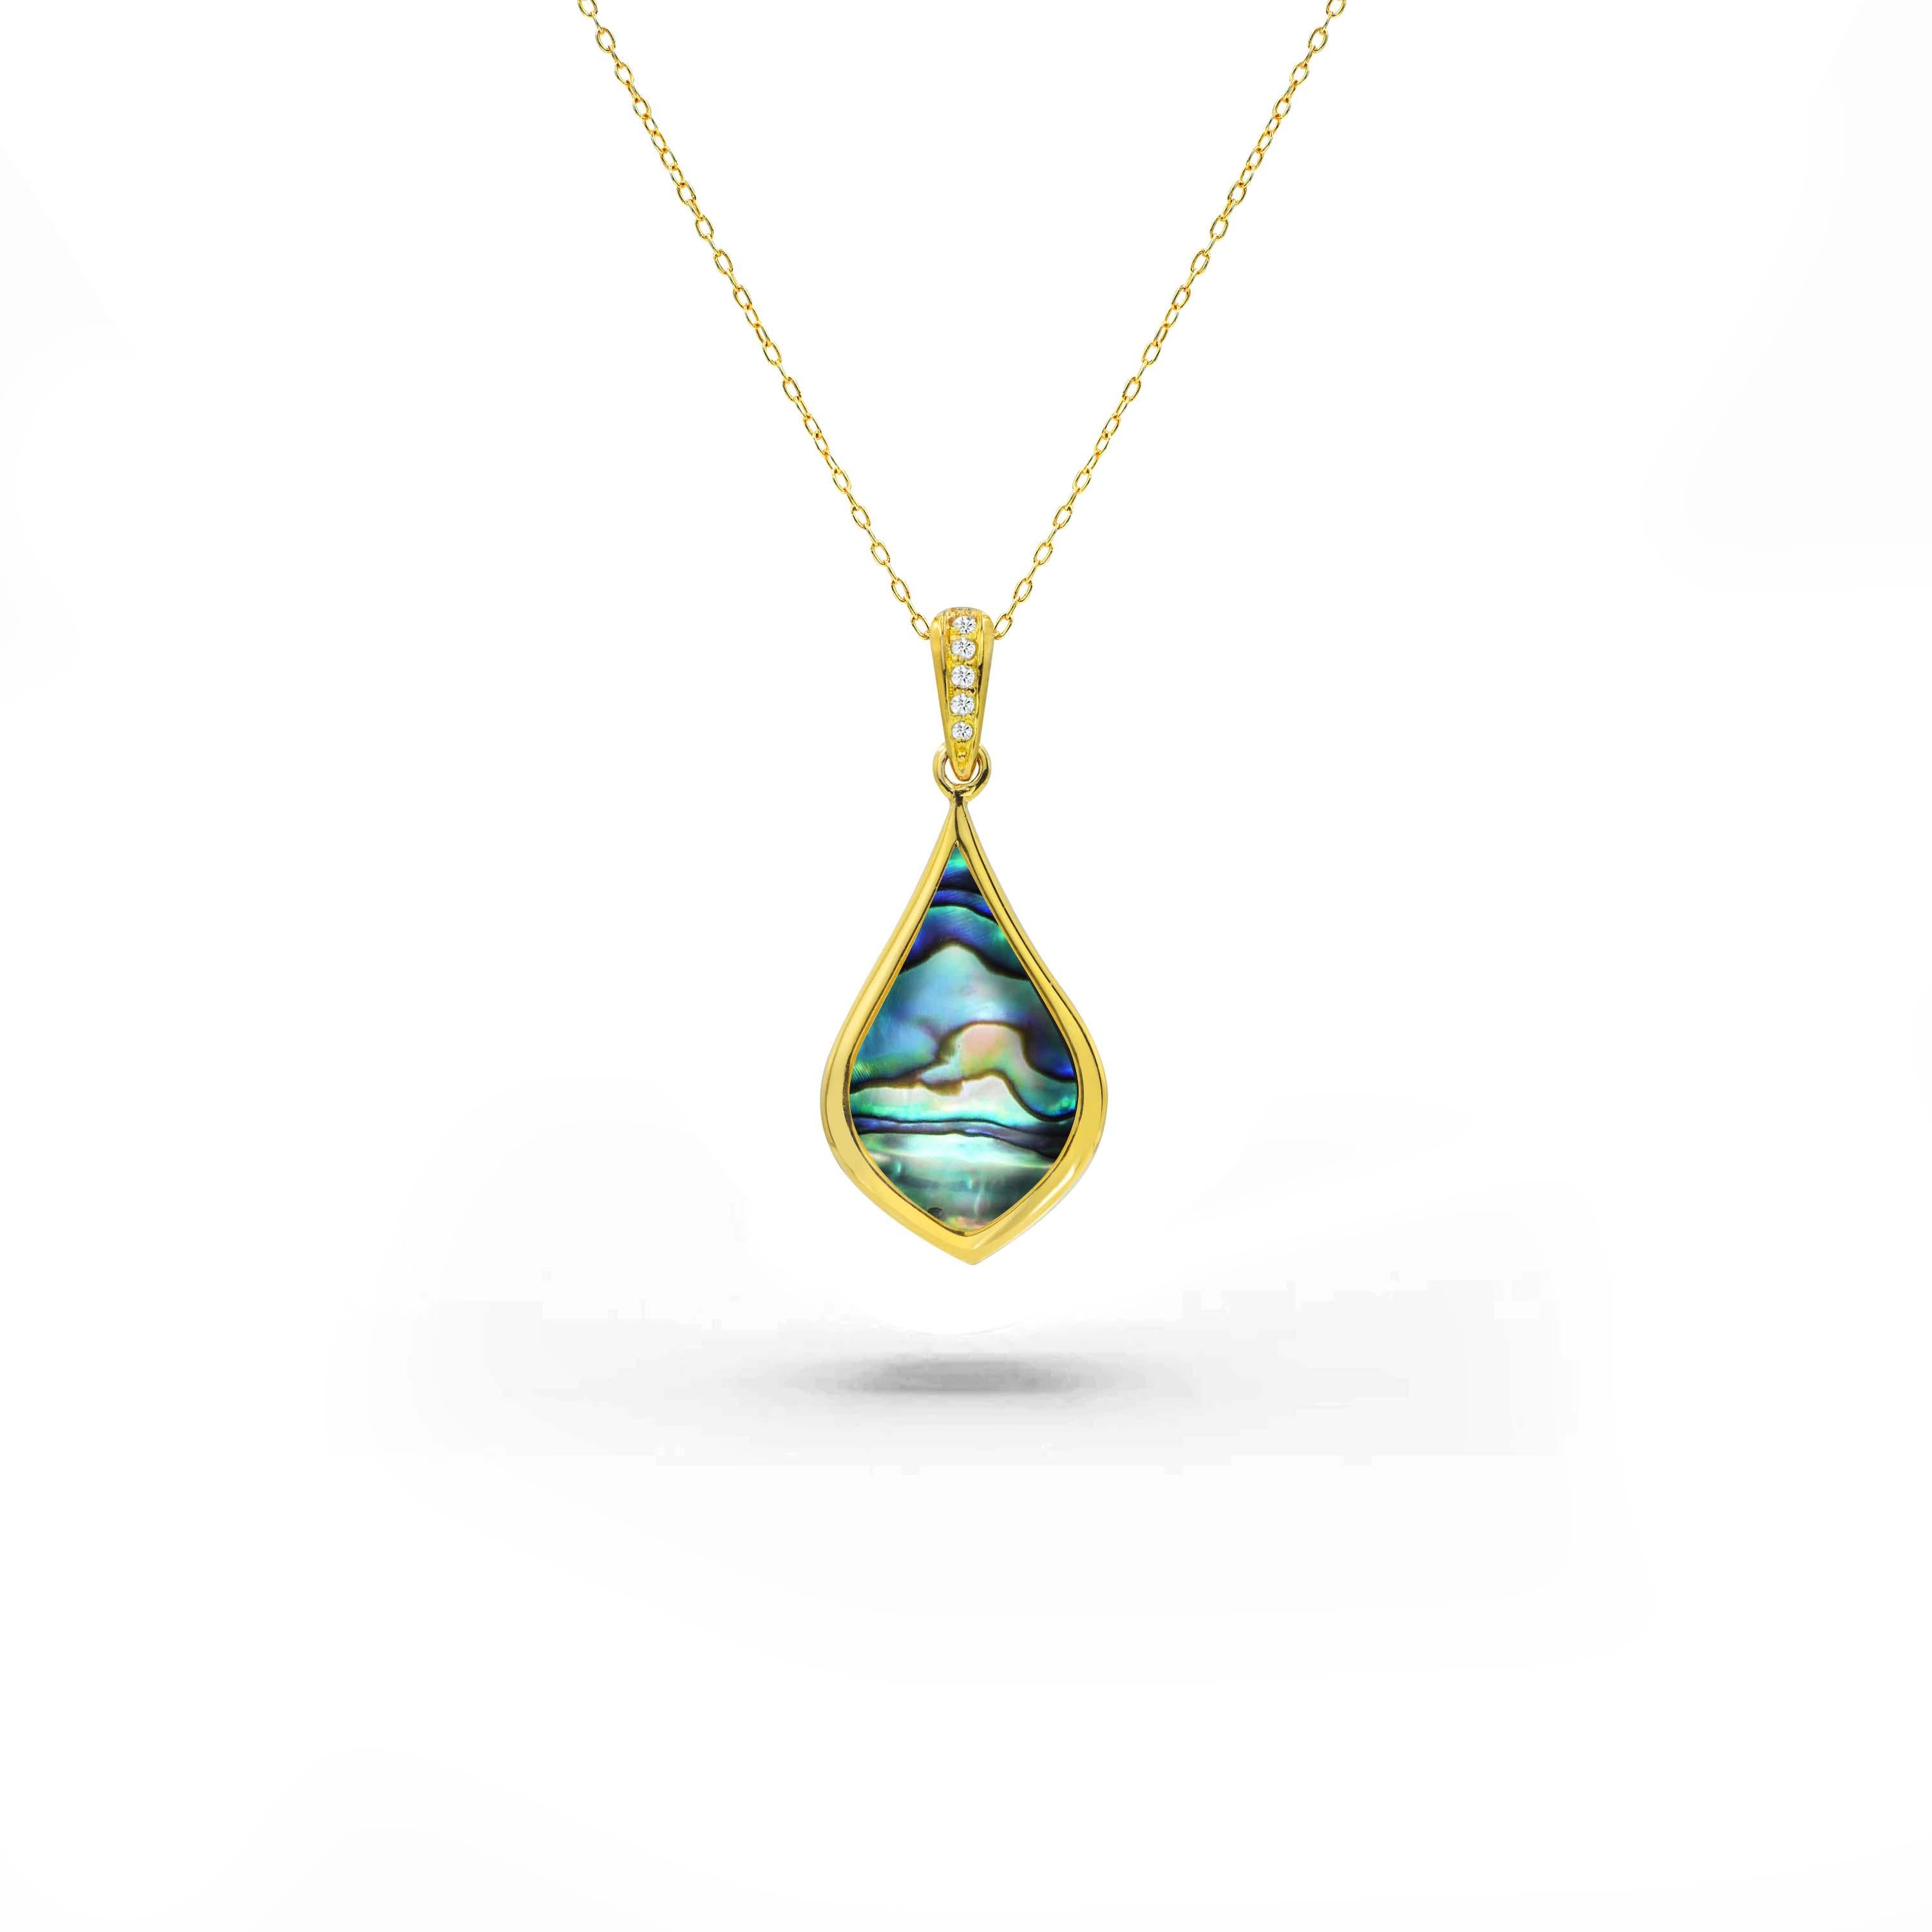 Introducing our exquisite 18K Gold Filled Necklace, a stunning fusion of natural beauty and refined craftsmanship. This captivating piece showcases the iridescent allure of Abalone, the delicate elegance of Mother of Pearl, and the sophisticated